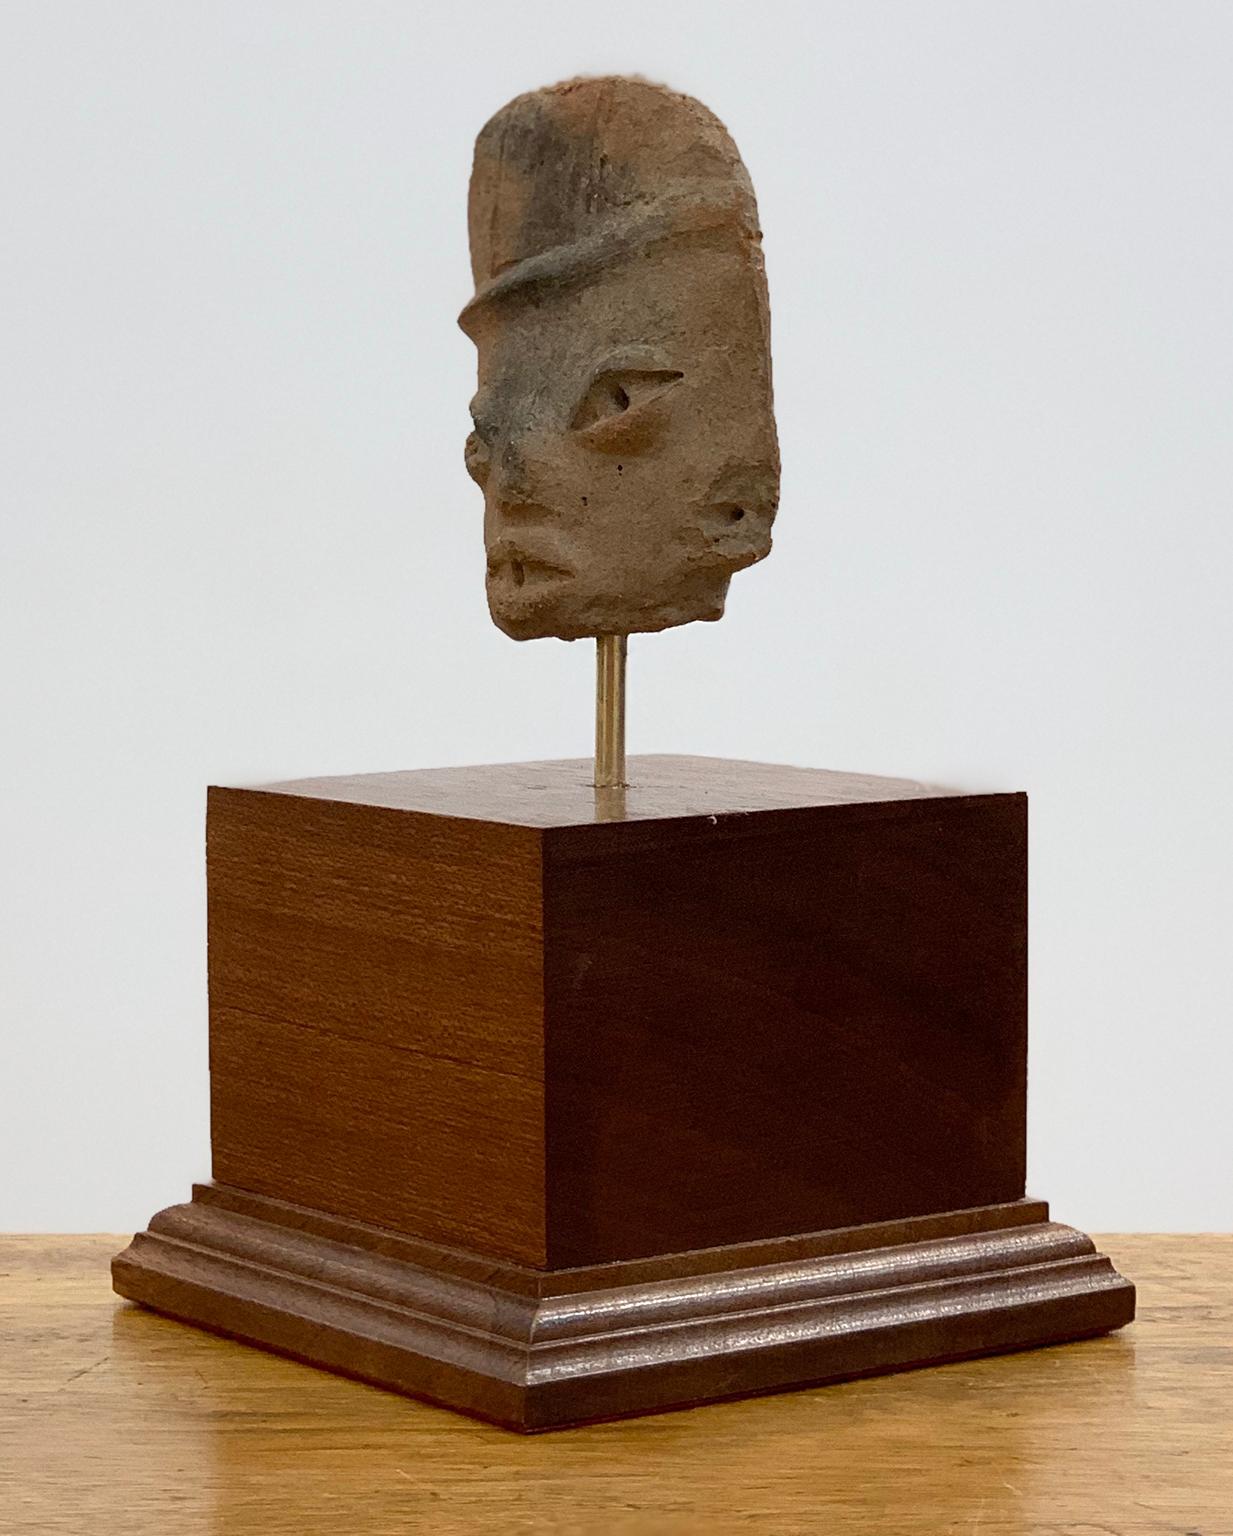 Small head of a flat figure with headdress - Michoacán - West Mexico. - Sculpture by Unknown